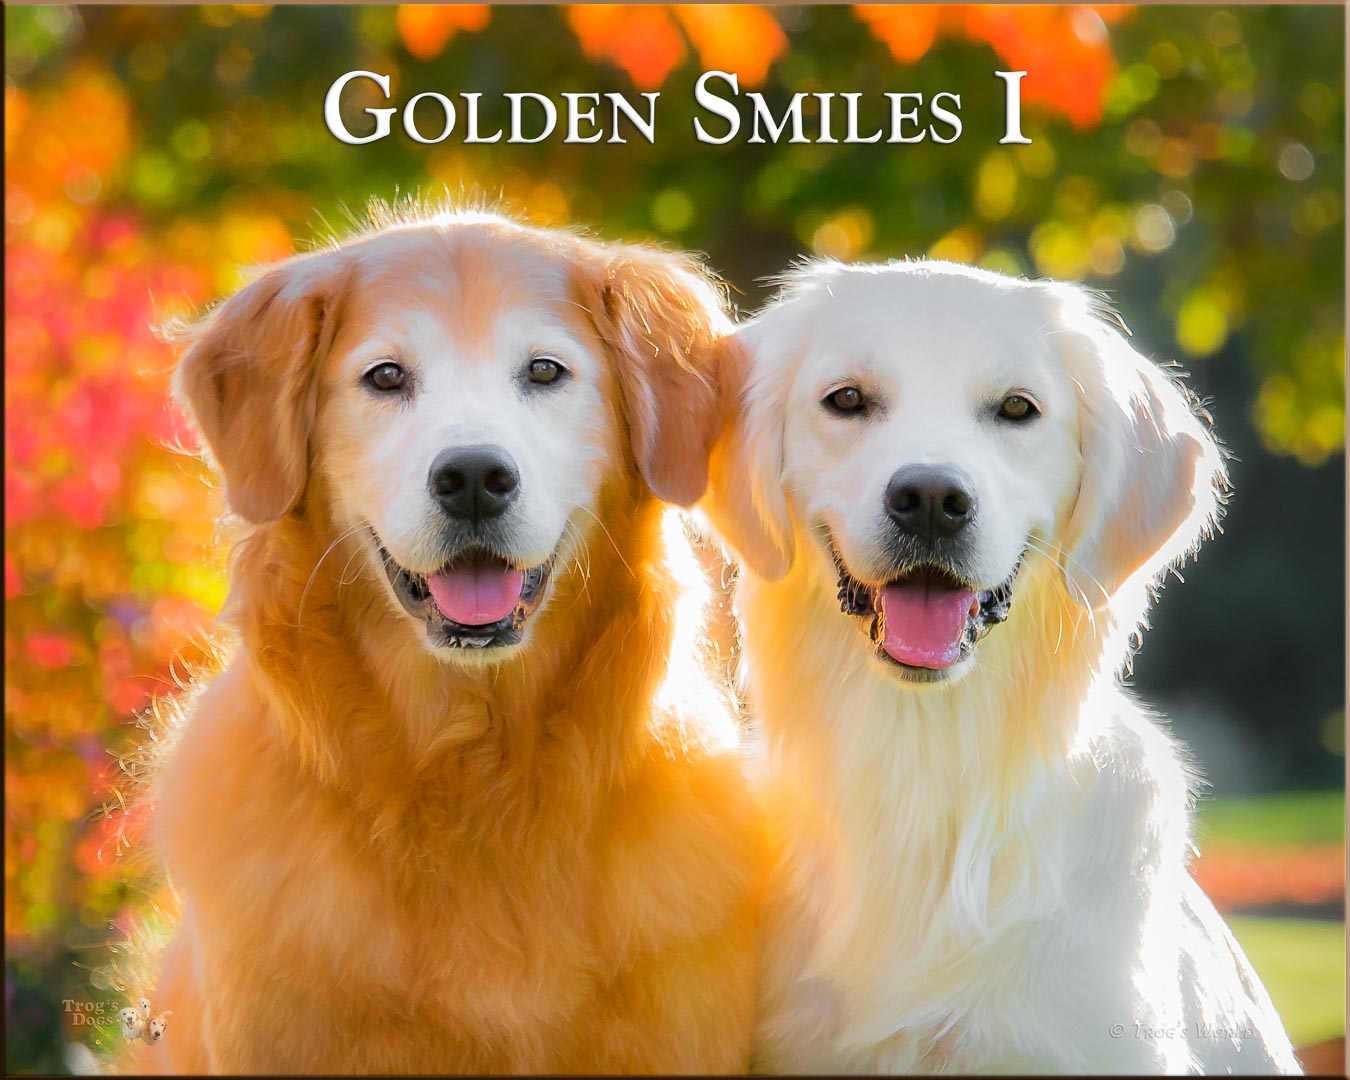 Two Golden Retrievers smiling